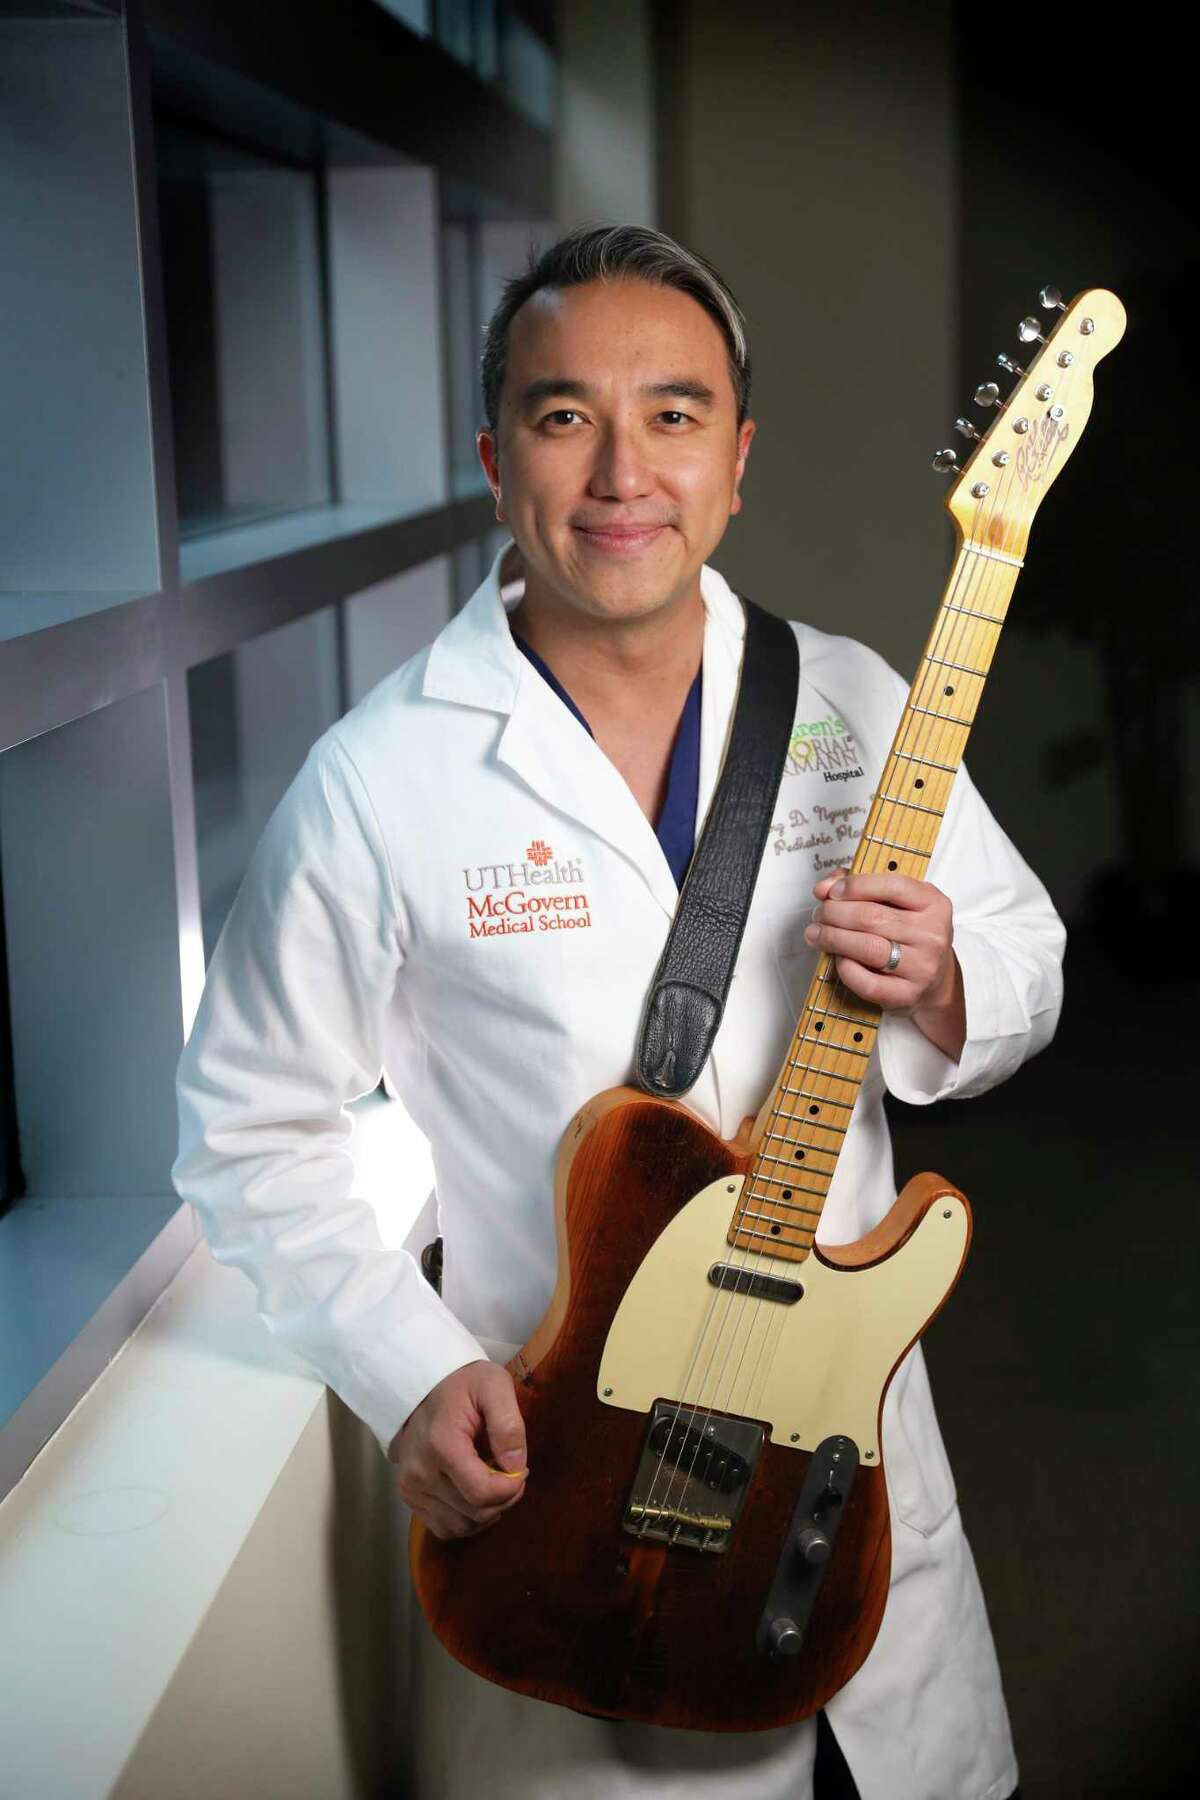 Dr. Phuong Nguyen, a pediatric surgeon with UTHealth, performed with Demi Lovato at a celebration on Inauguration Day.